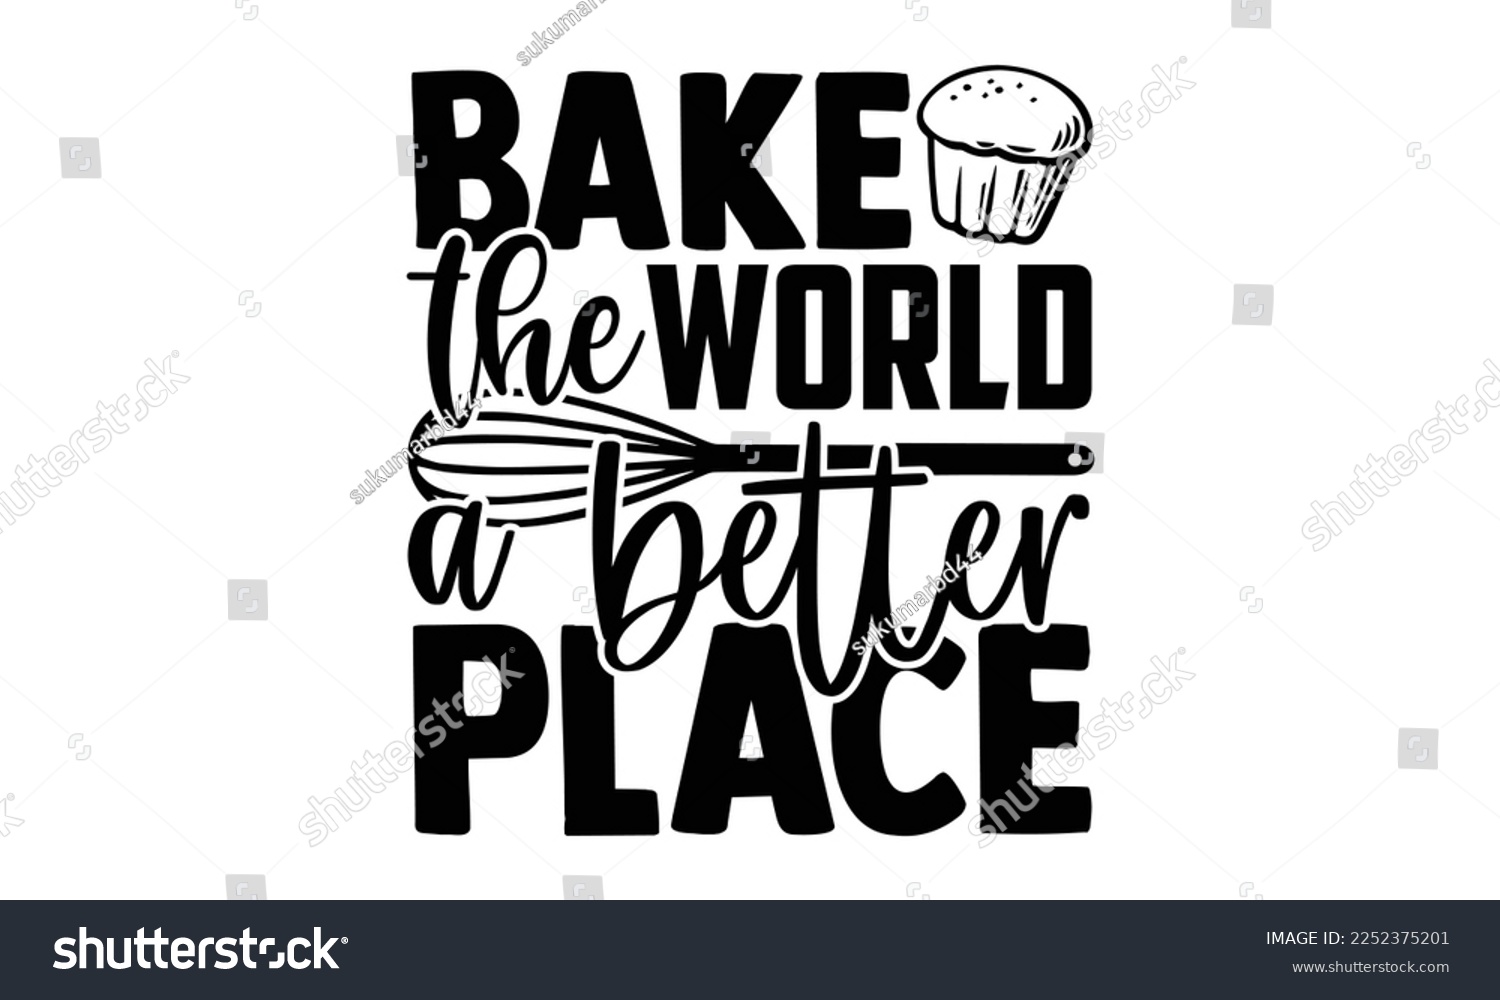 SVG of Bake The World A Better Place - Baker t shirt design, Hand drawn lettering phrase isolated on white background, Calligraphy quotes design, SVG Files for Cutting, bag, cups, card svg